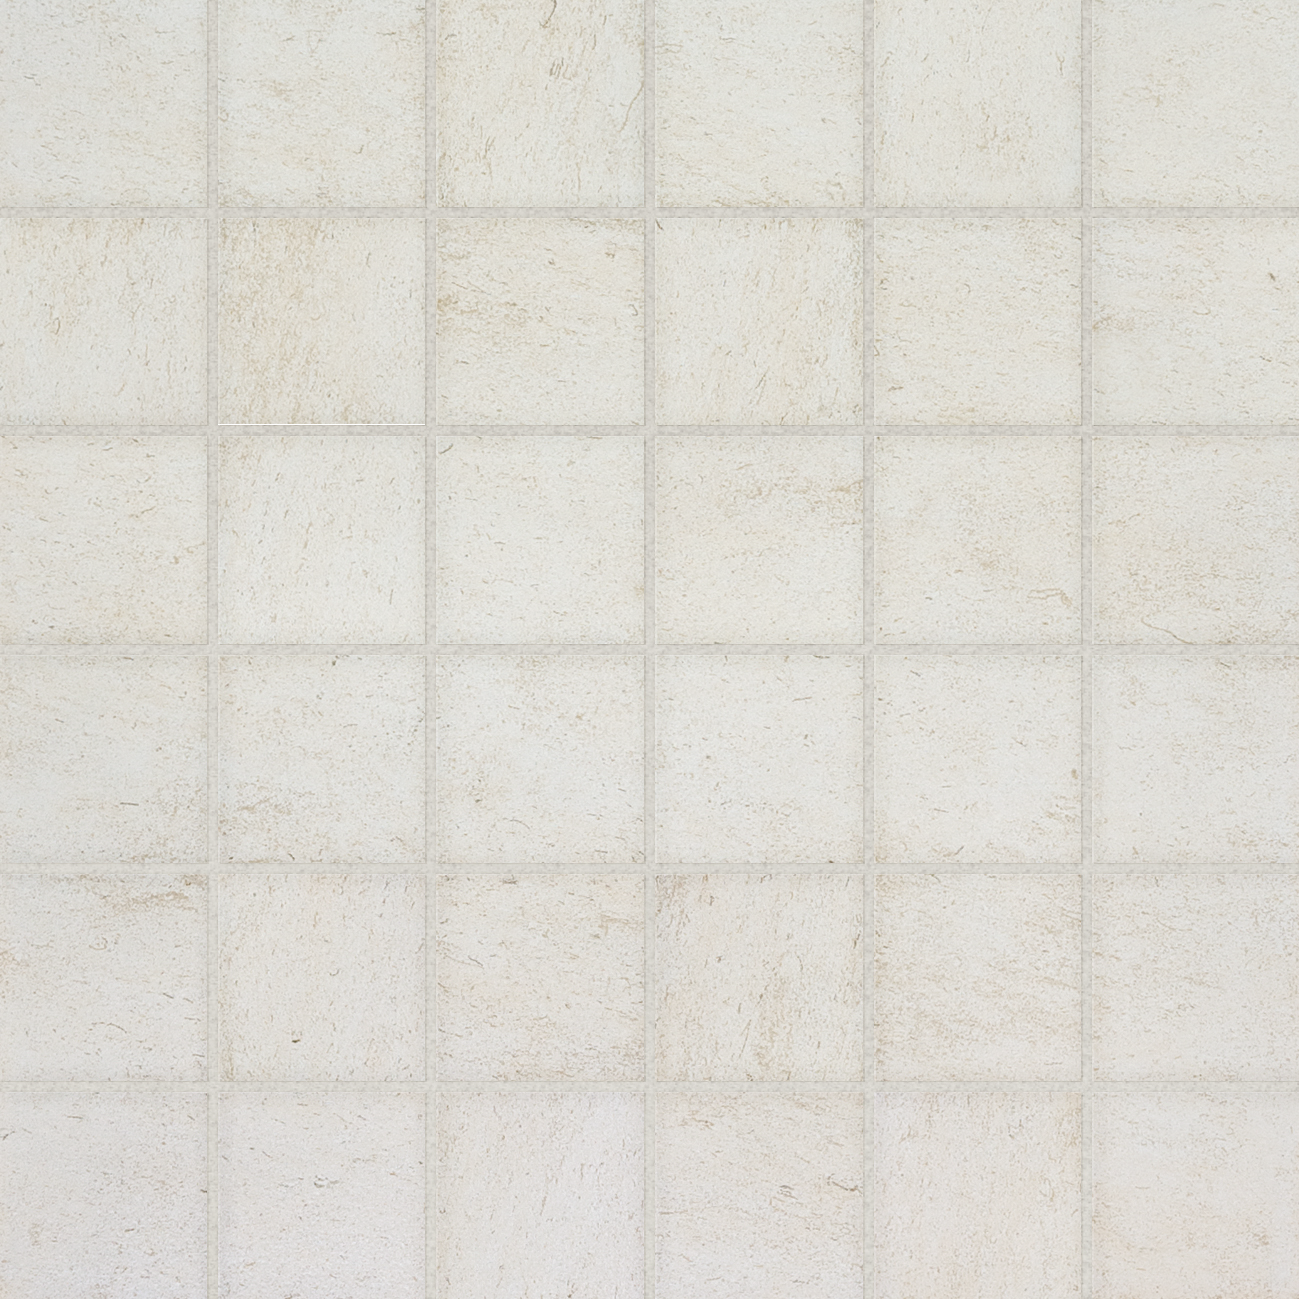 cream straight stack 2x2-inch pattern glazed ceramic mosaic from cinq anatolia collection distributed by surface group international matte finish straight edge edge mesh shape